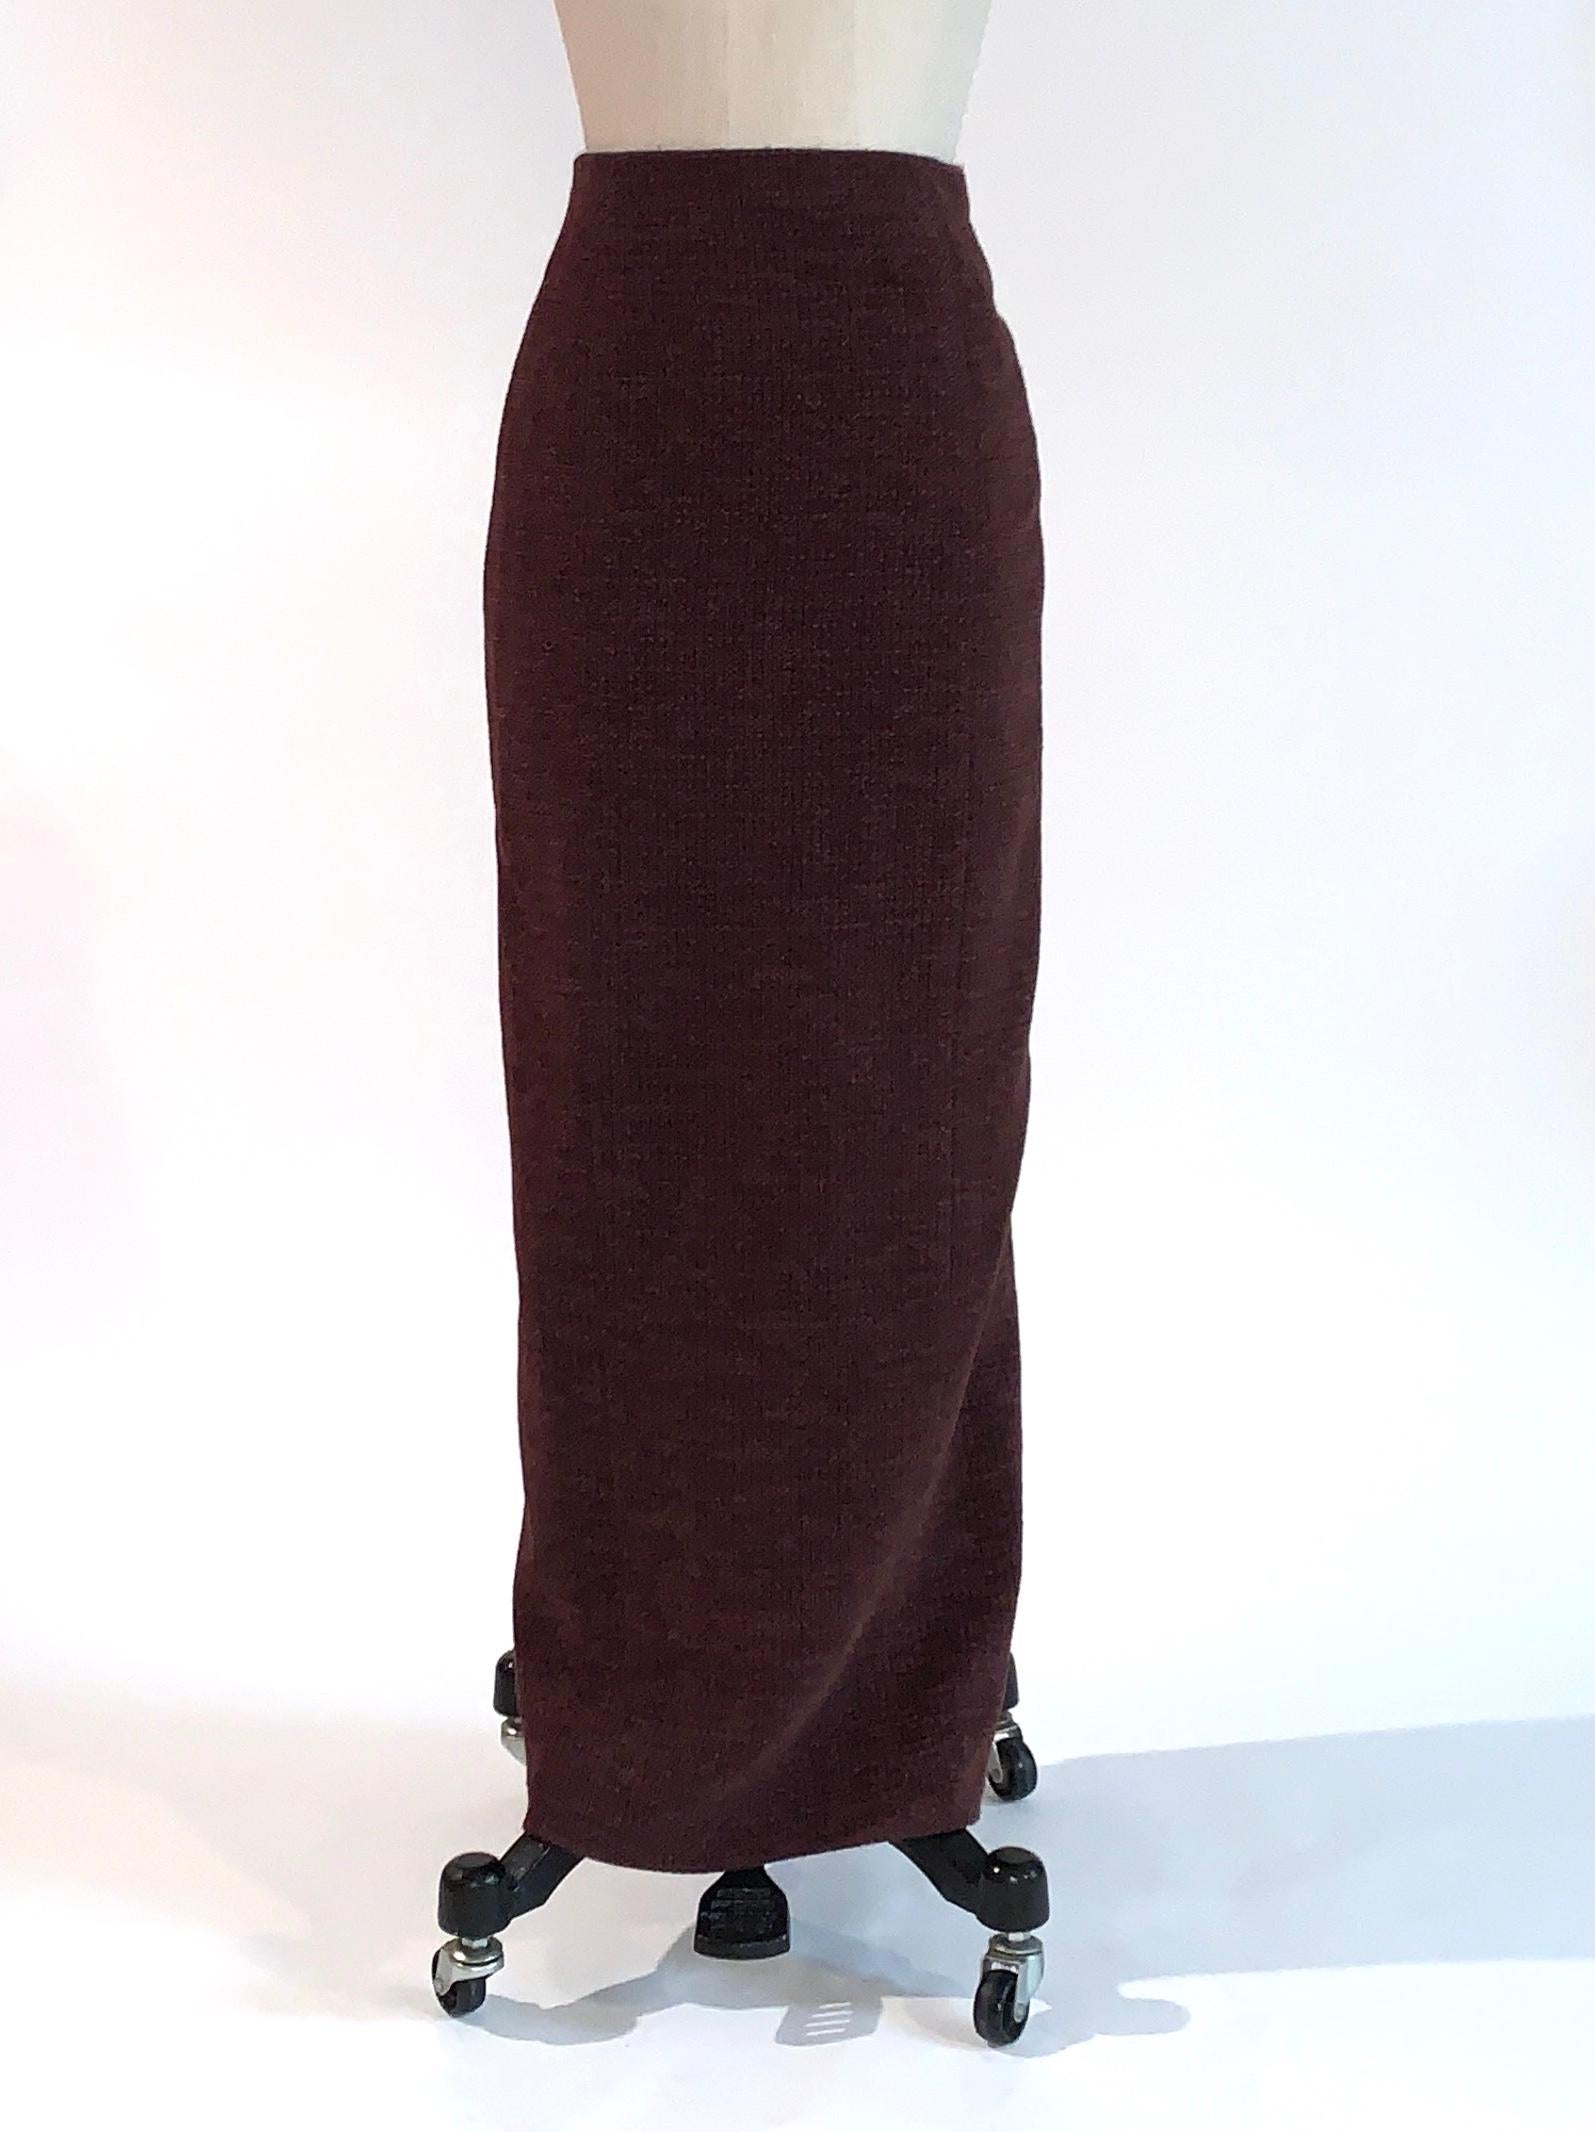 Chanel vintage burgundy tweed long skirt, circa 1998. (Fits as midi skirt if taller, maxi if not.) Tweed has navy blue and red accents, lending the skirt an overall slightly purple effect. Four bronze tone metal CC logo buttons at back slit. Back